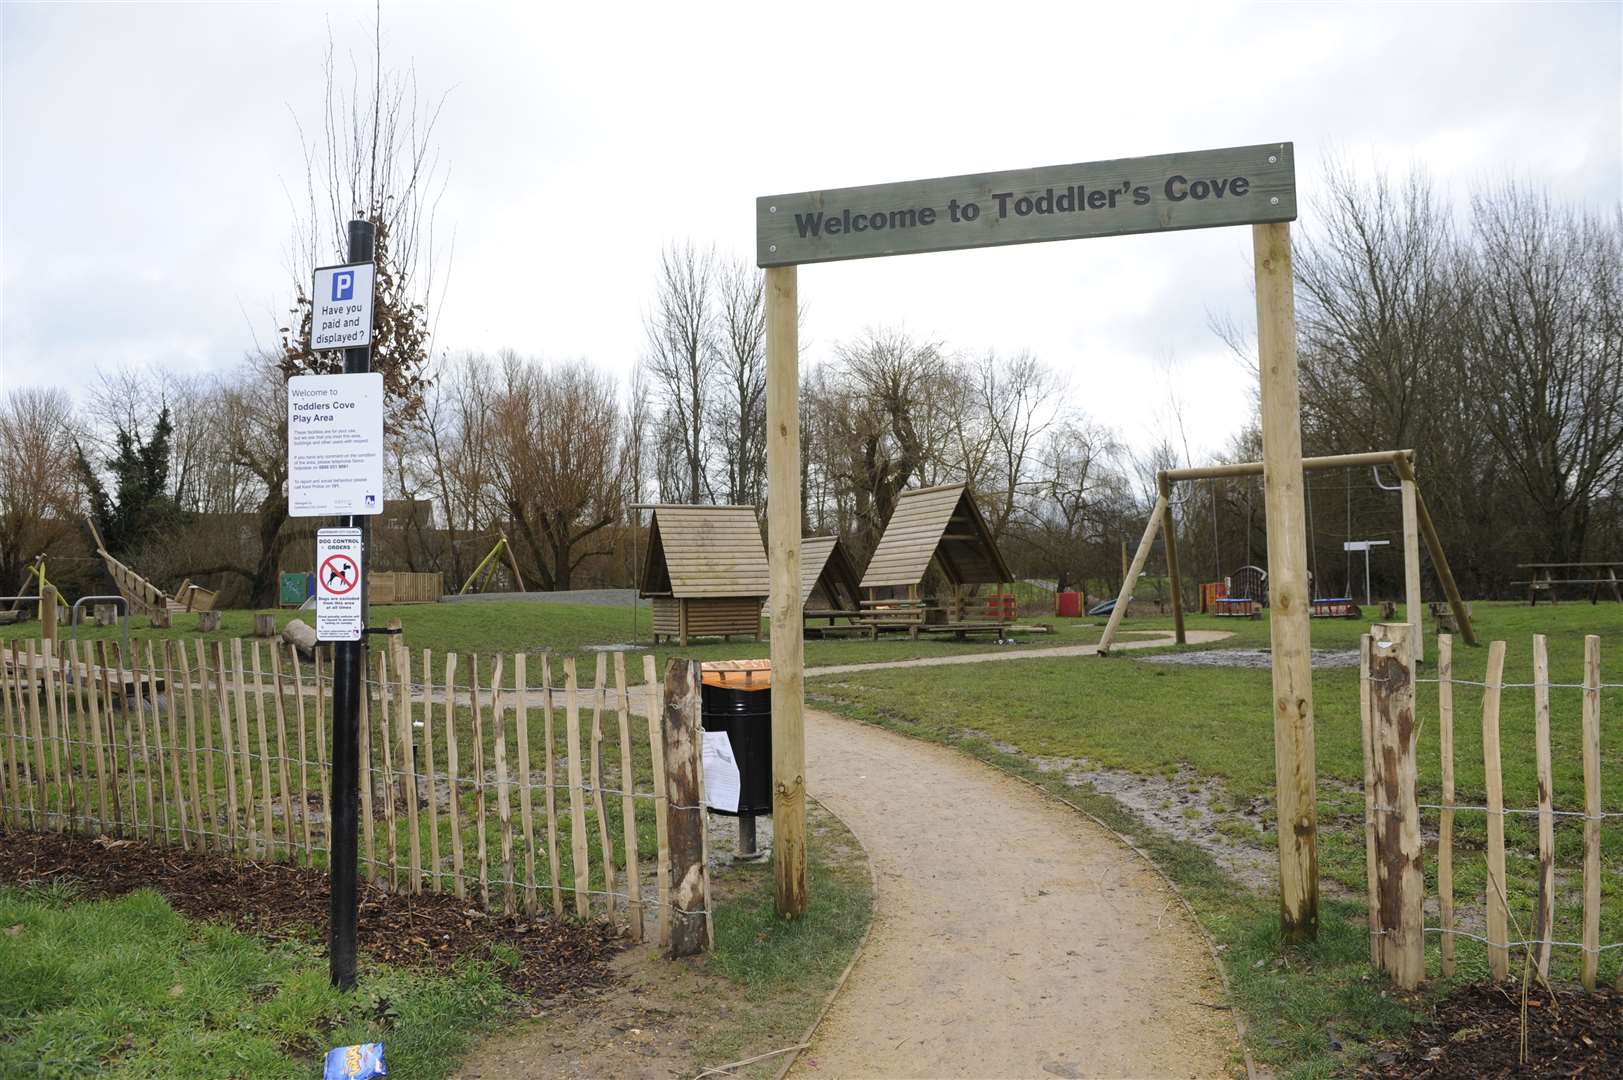 The man's tent was torched at Toddler's Cove play area in Canterbury